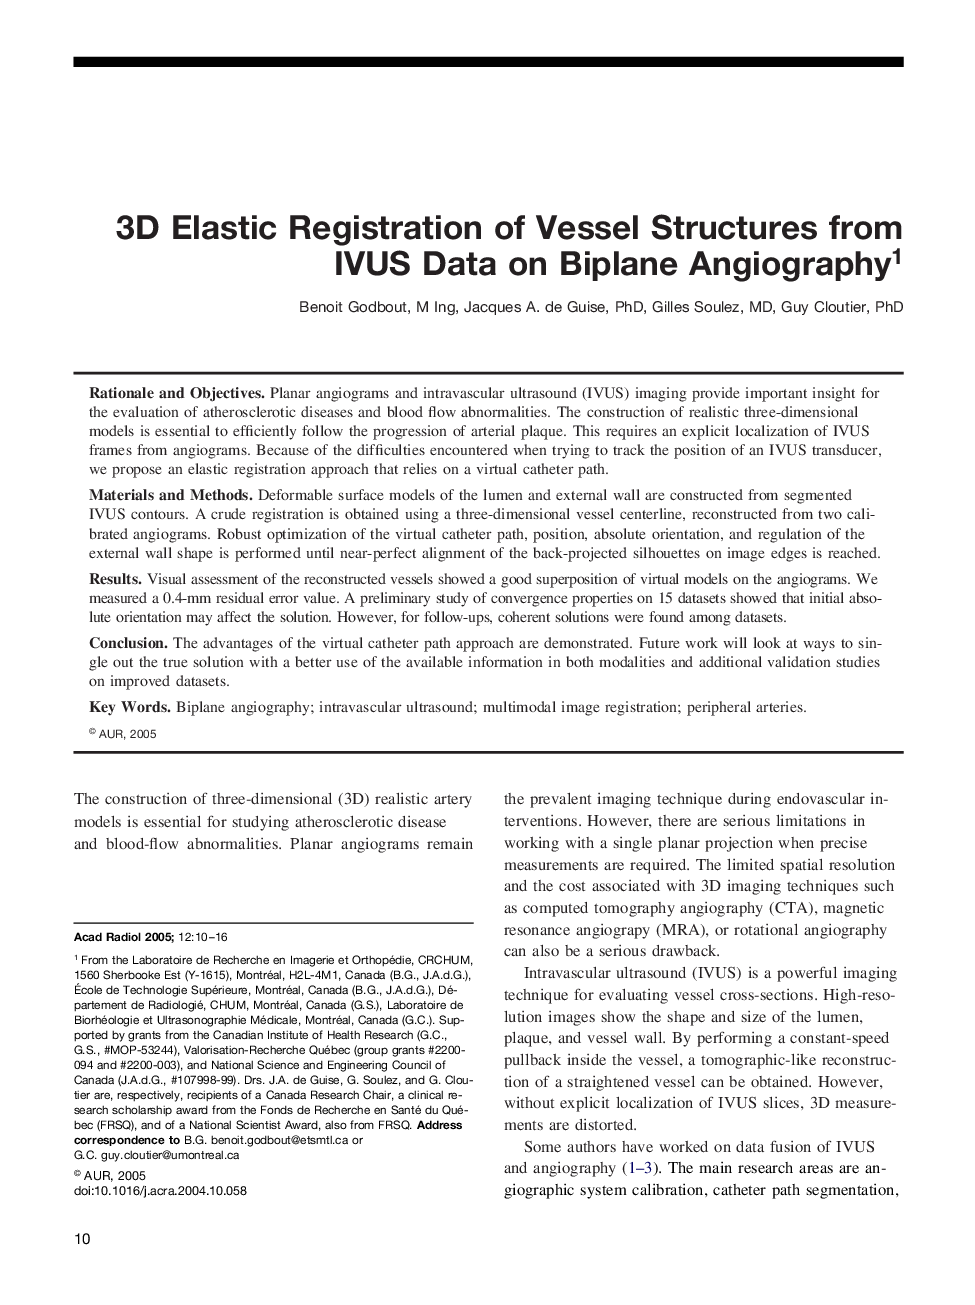 3D elastic registration of vessel structures from IVUS data on biplane angiography1